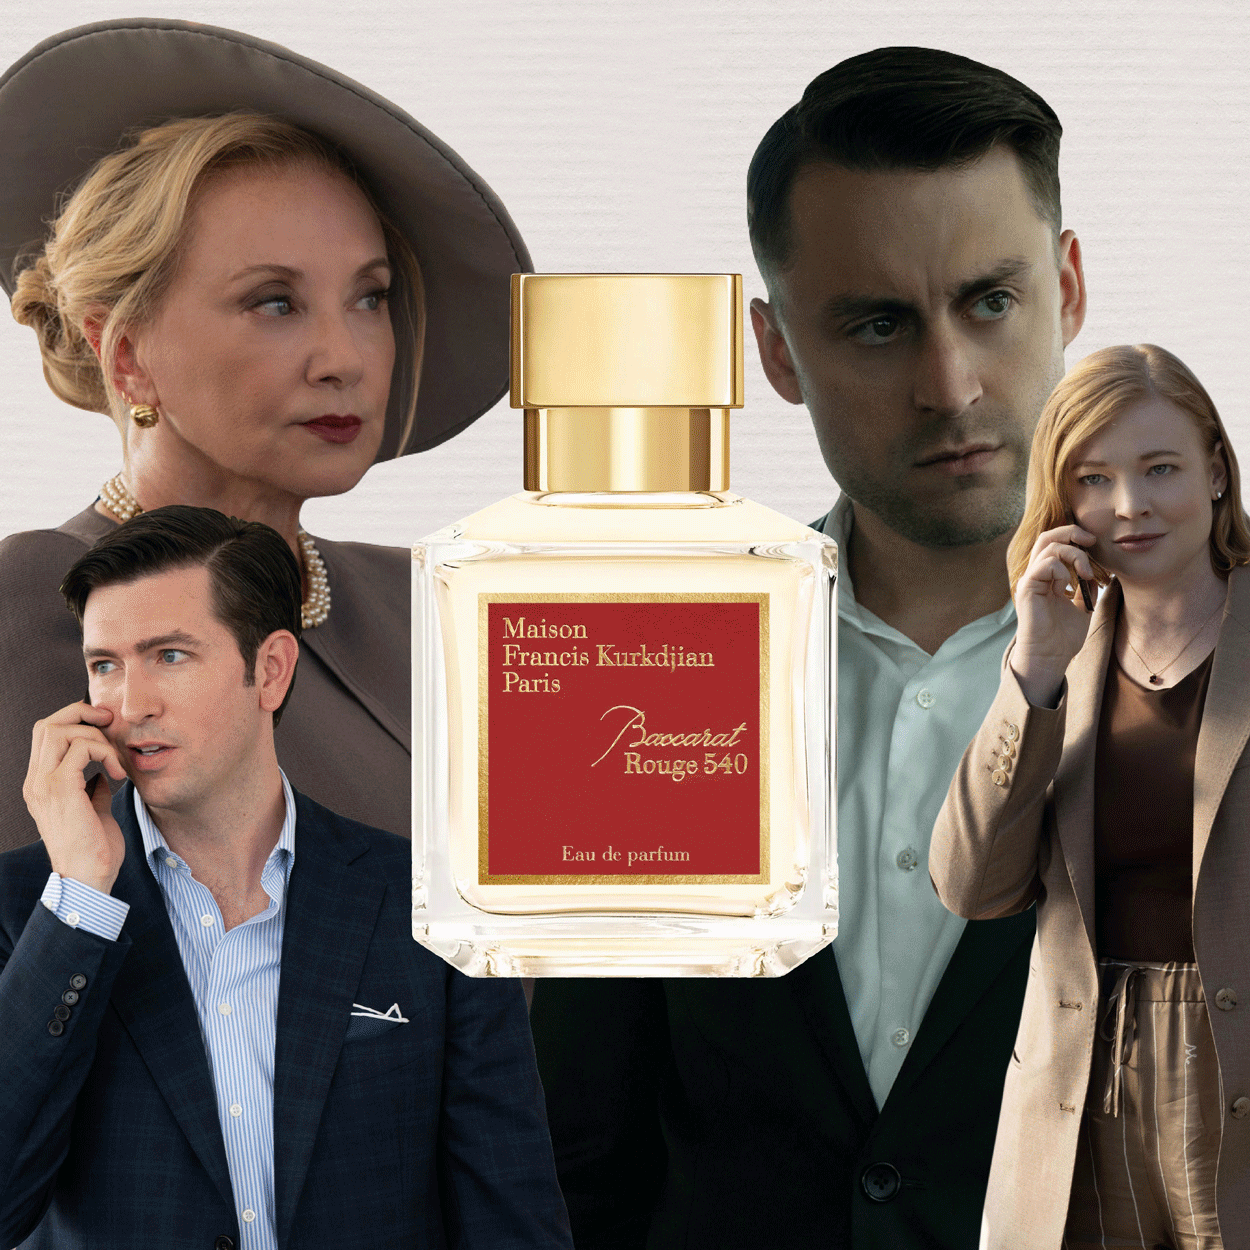 succession-character-perfume-306945-1682630178836-square